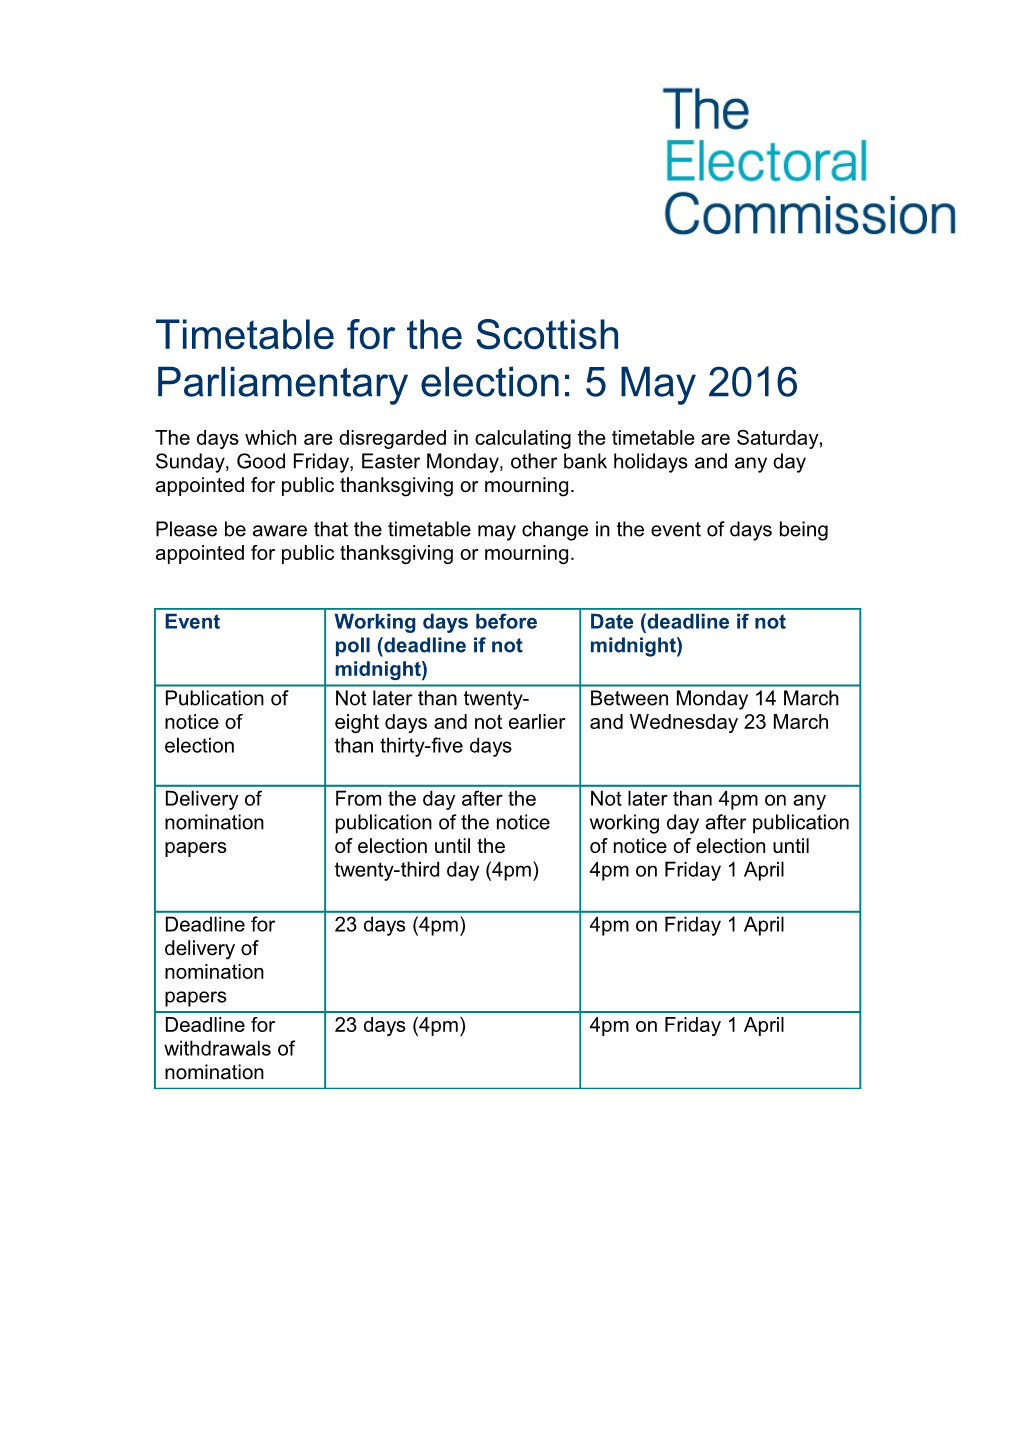 Timetable for the Scottish Parliamentary Election: 5 May 2016